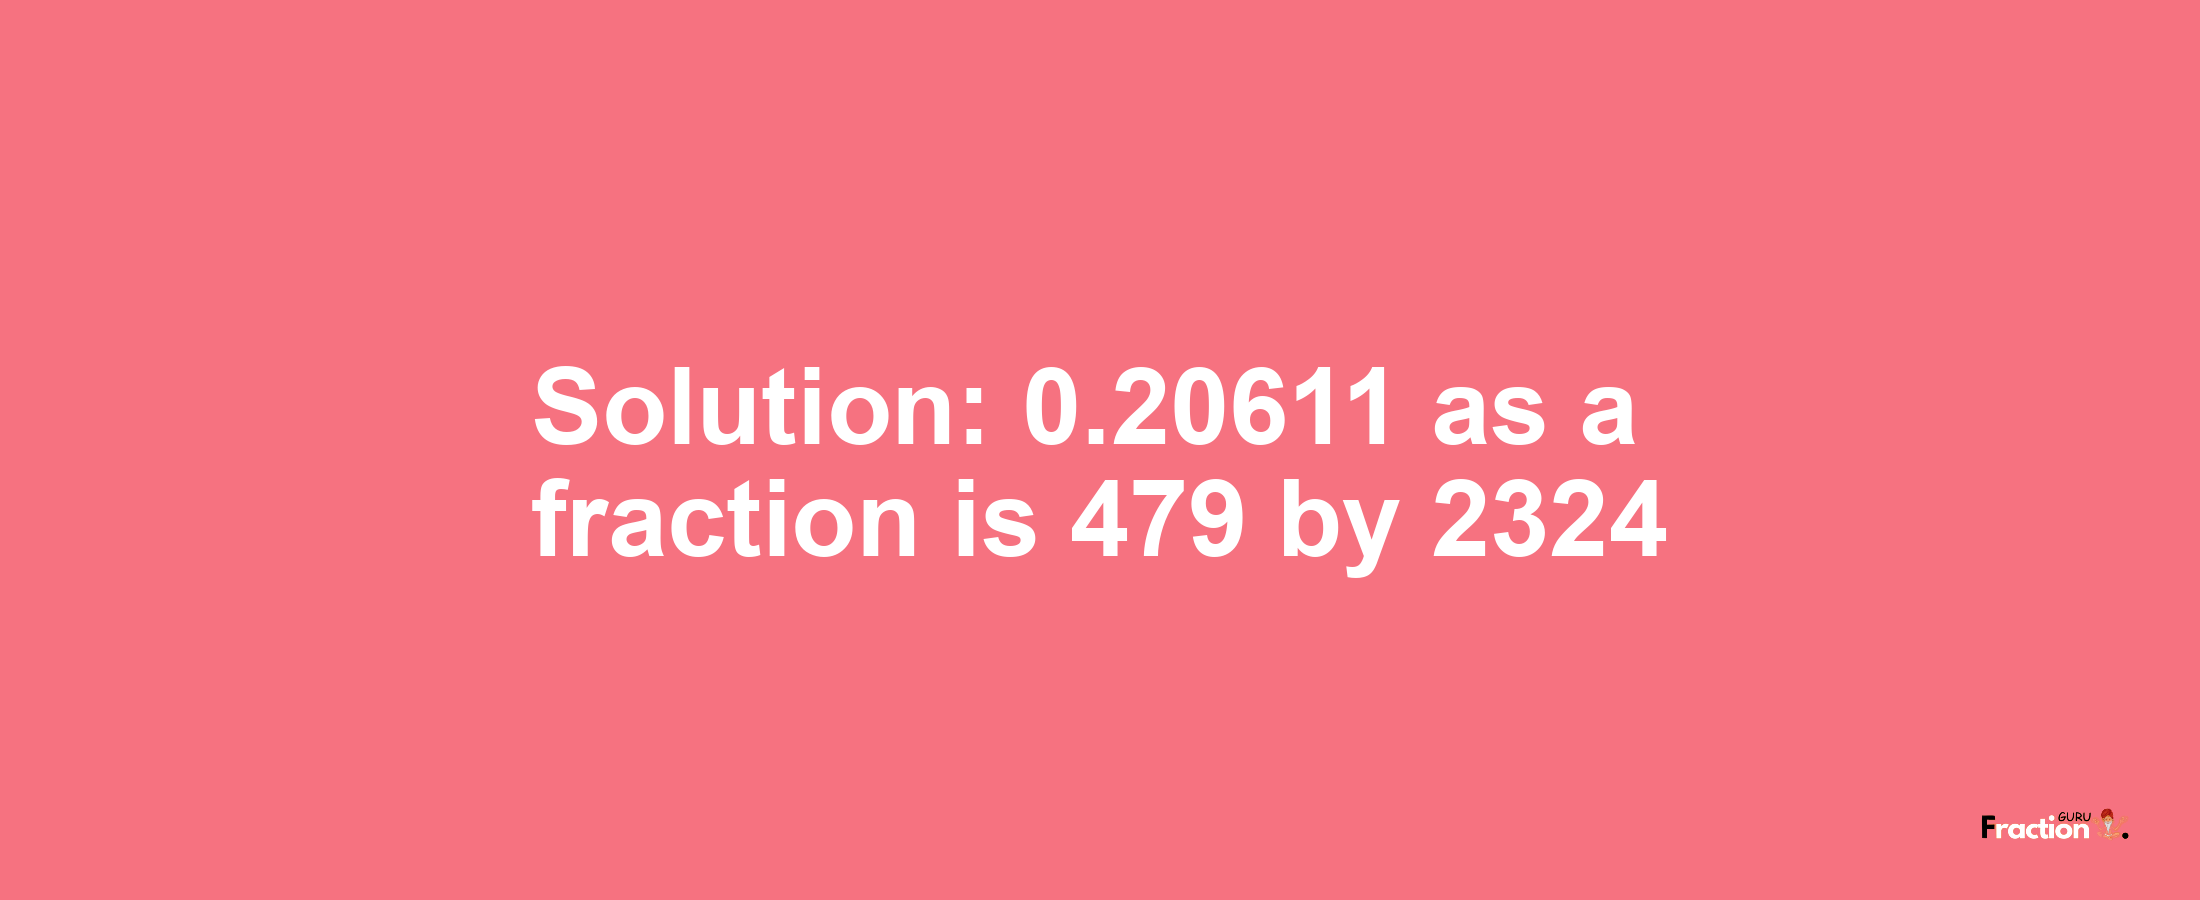 Solution:0.20611 as a fraction is 479/2324